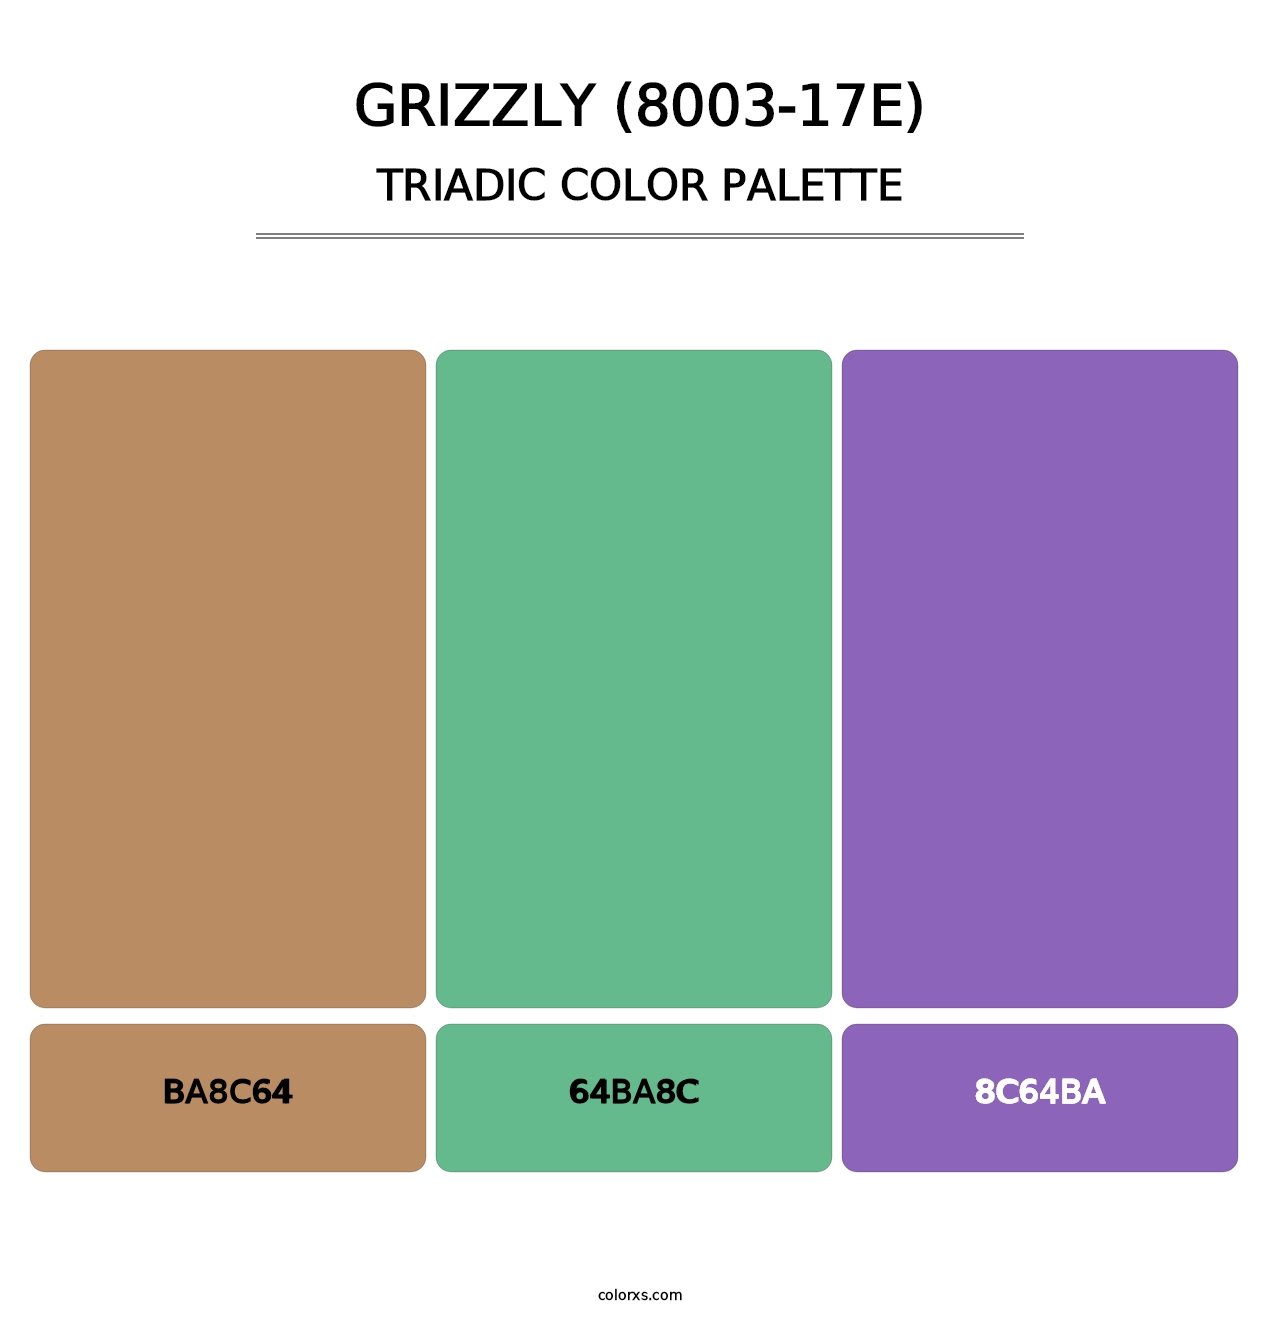 Grizzly (8003-17E) - Triadic Color Palette